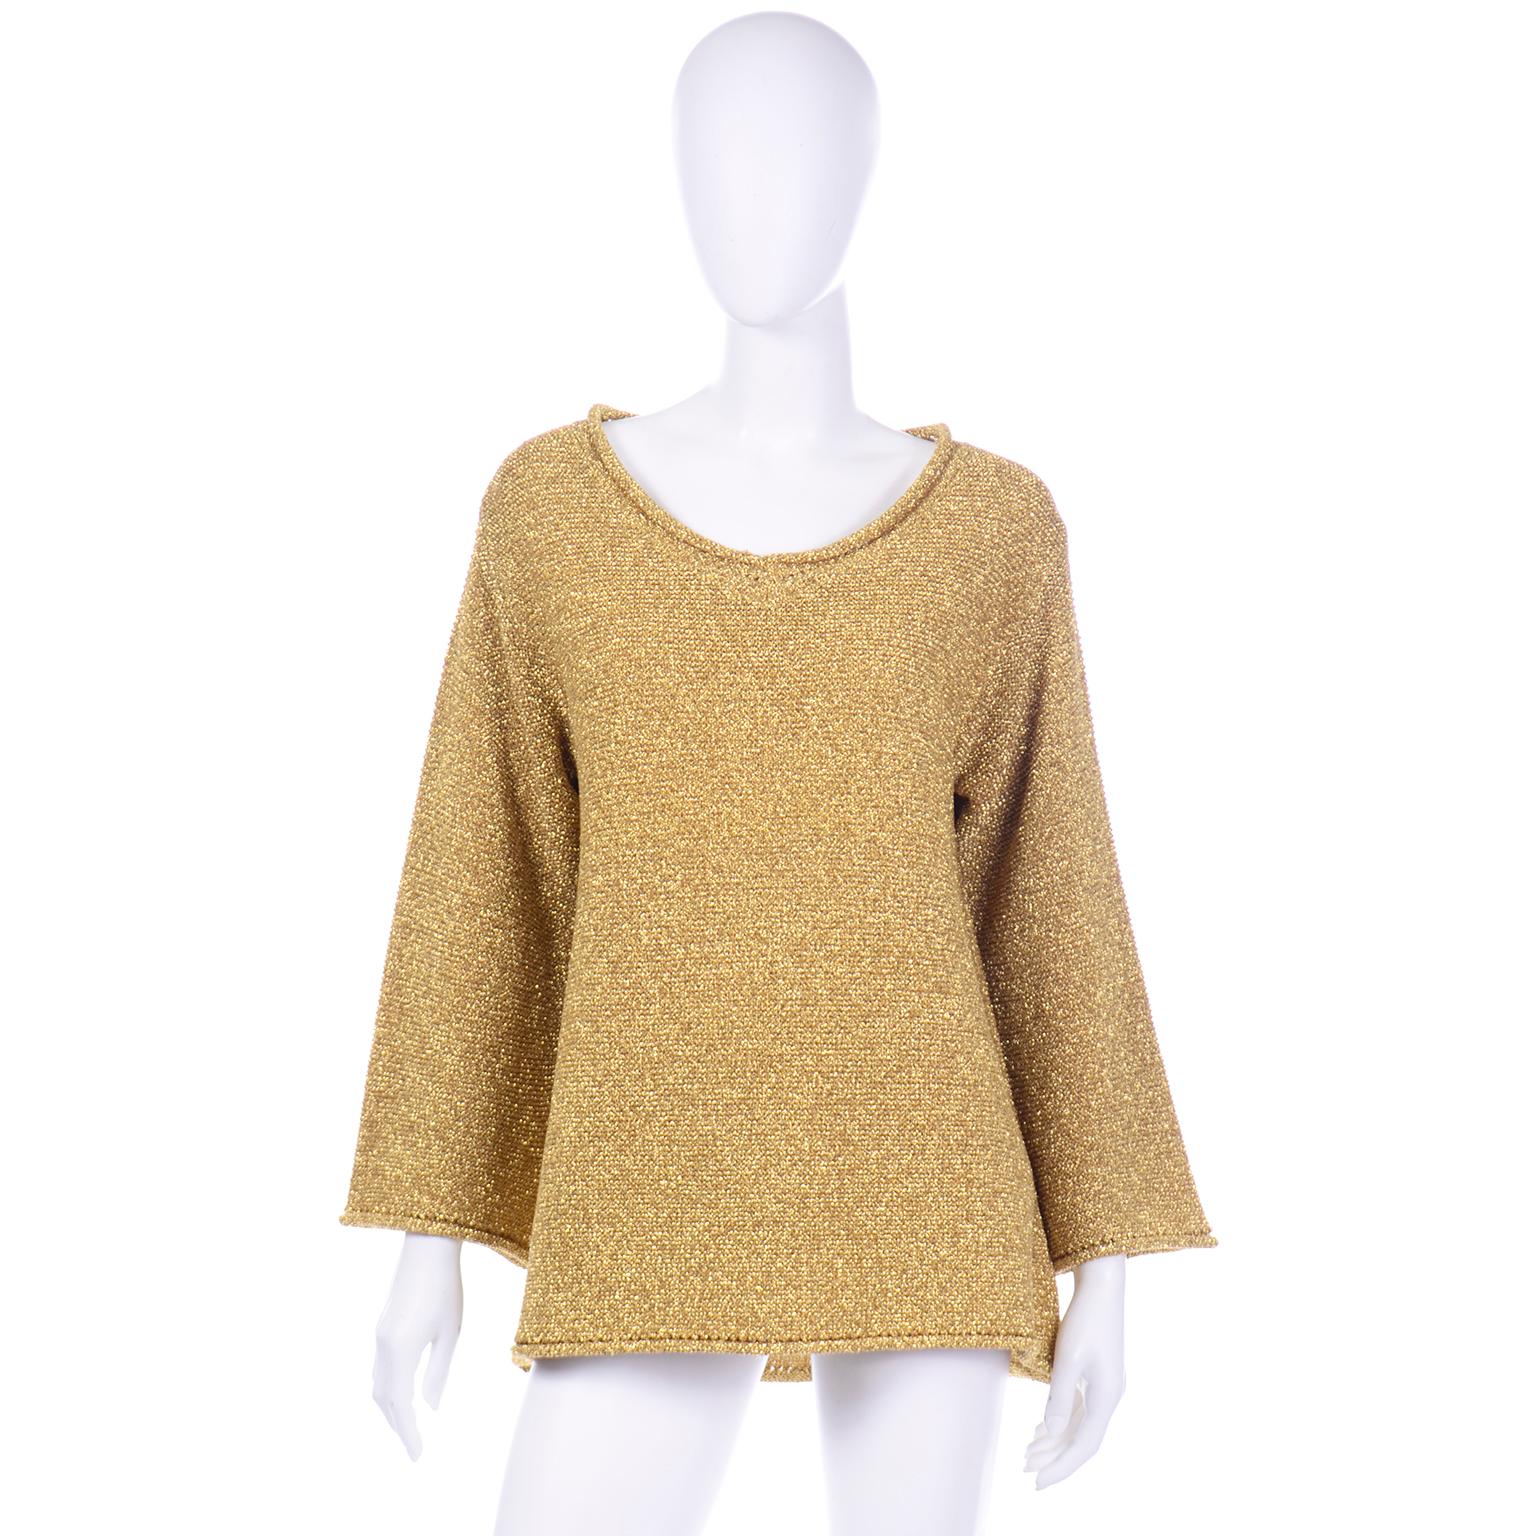 This is such a stunning vintage 1980's gold metallic knit pullover sweater from Claude Montana. This beautiful top has a slightly scooped round neckline with an open knit and rolled edge that is also found around the cuffs of the sleeves and hem.